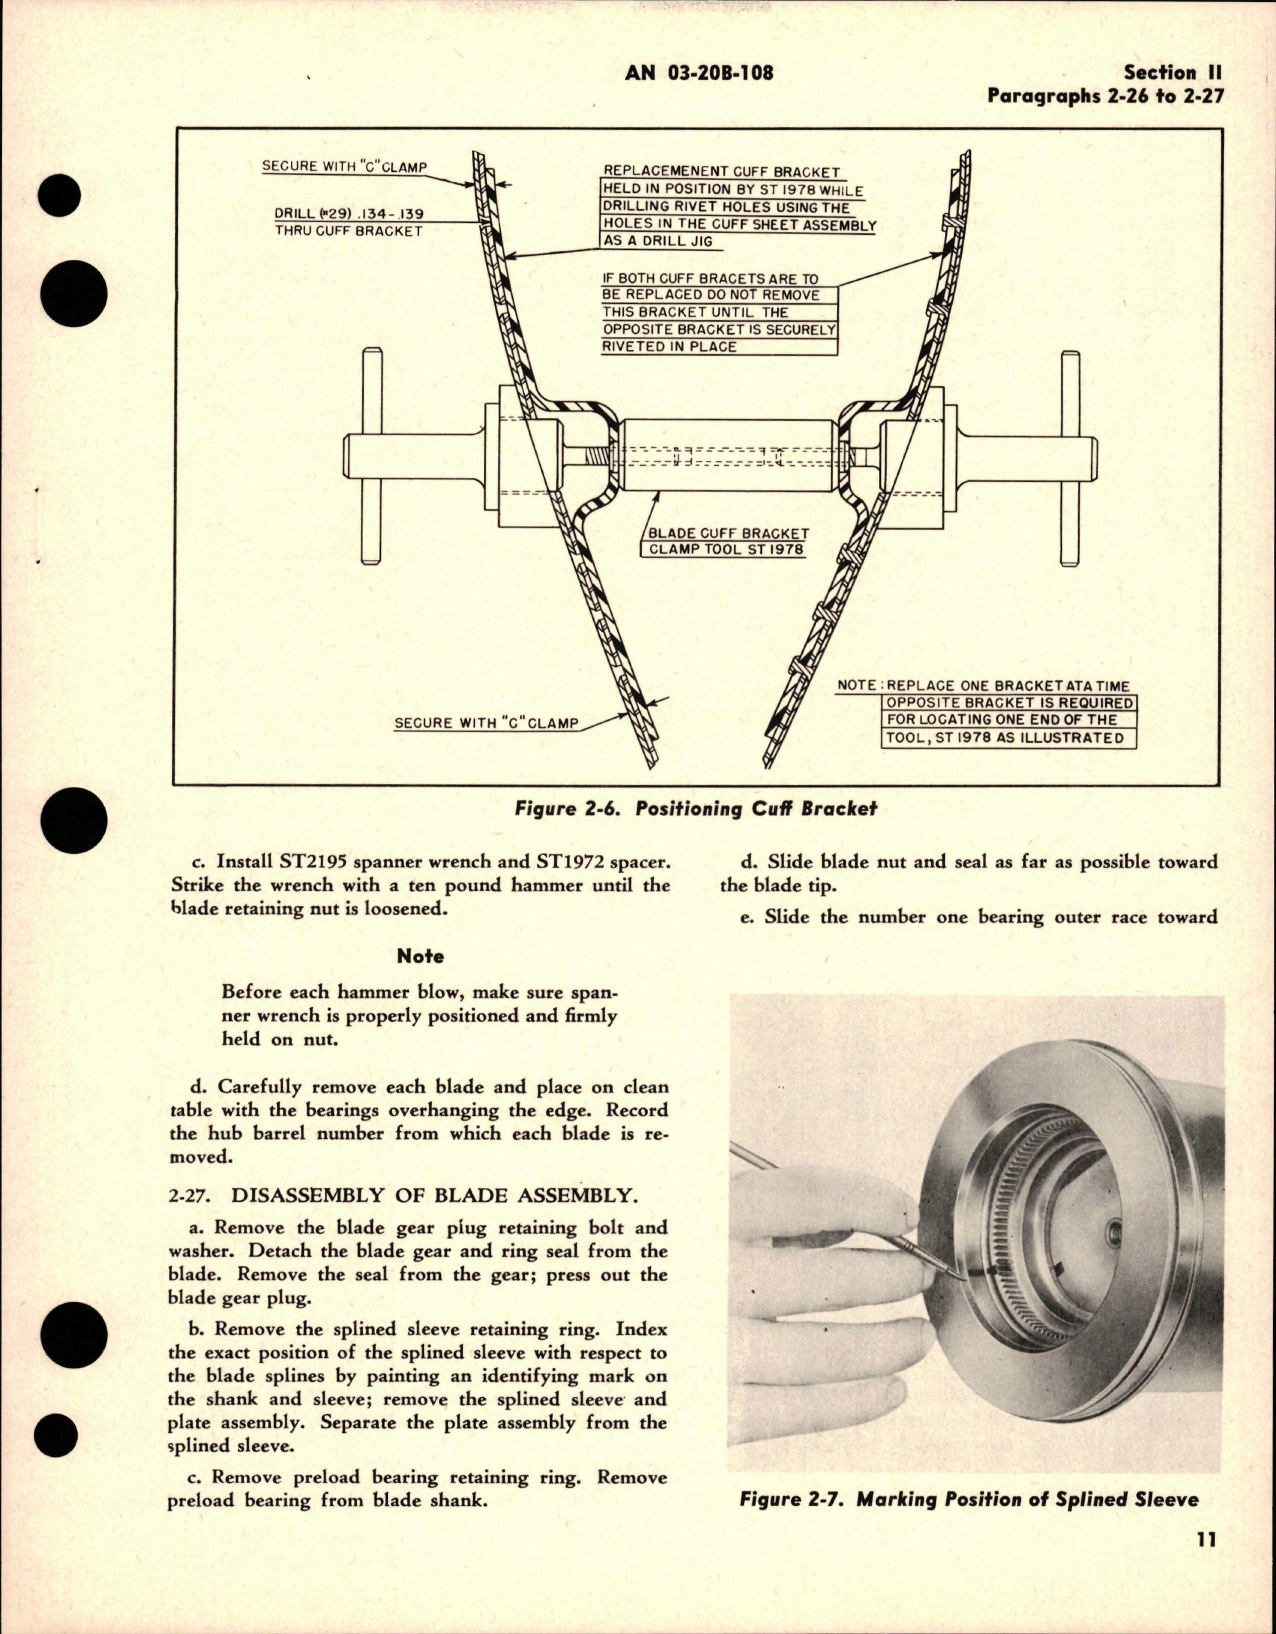 Sample page 9 from AirCorps Library document: Overhaul Instructions for Pitch Lever Type Electric Propeller - Models C432S-C22, C432S-C24, C432S-C26